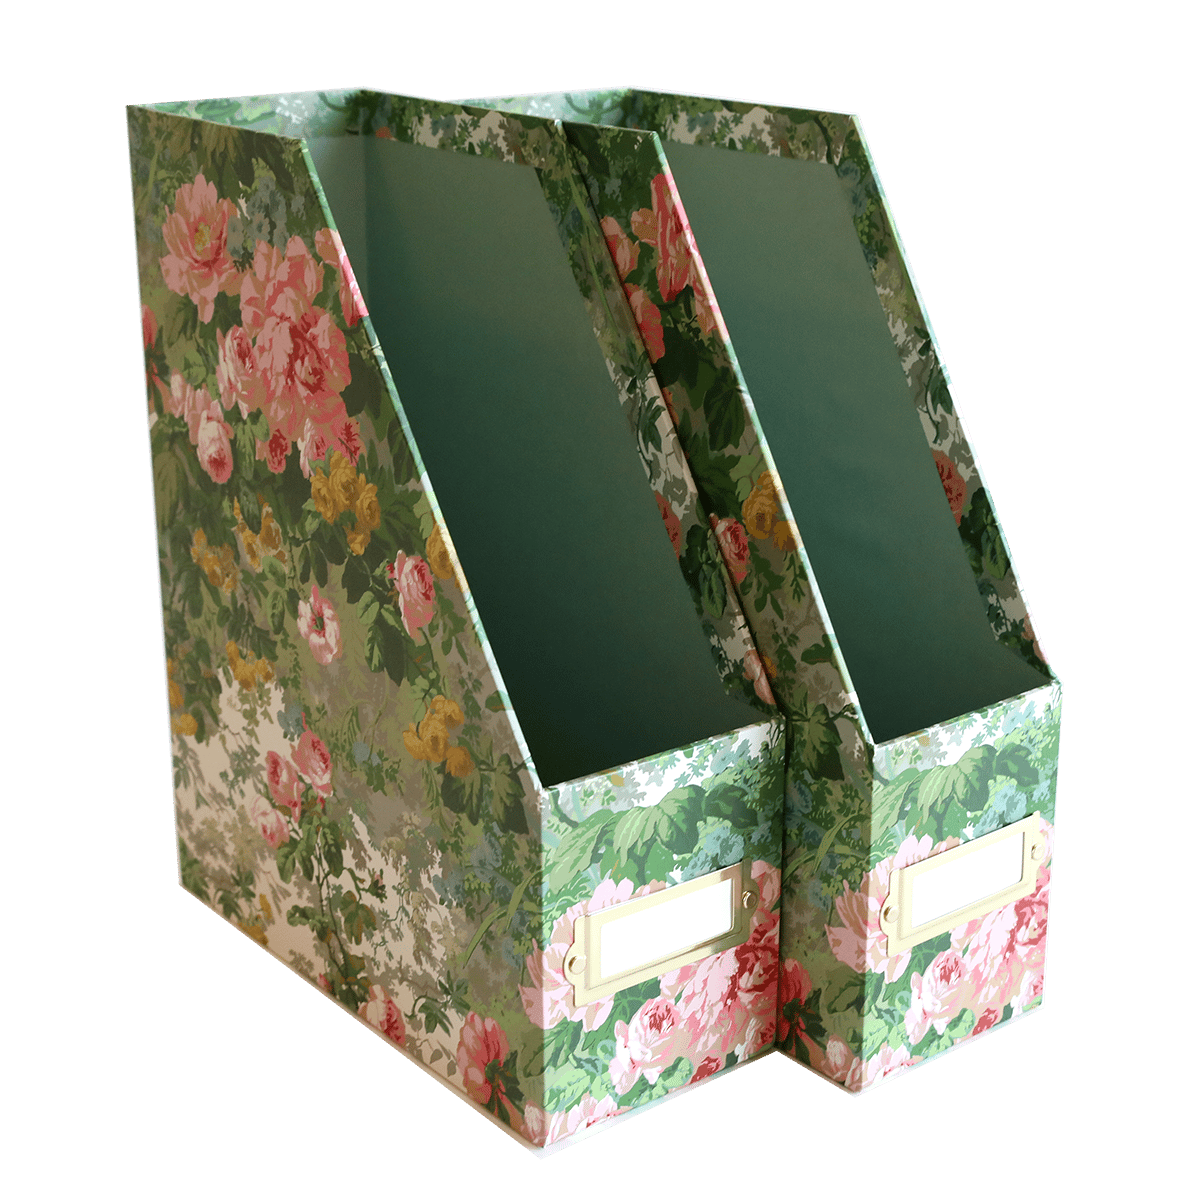 a pair of flowered boxes sitting on top of each other.